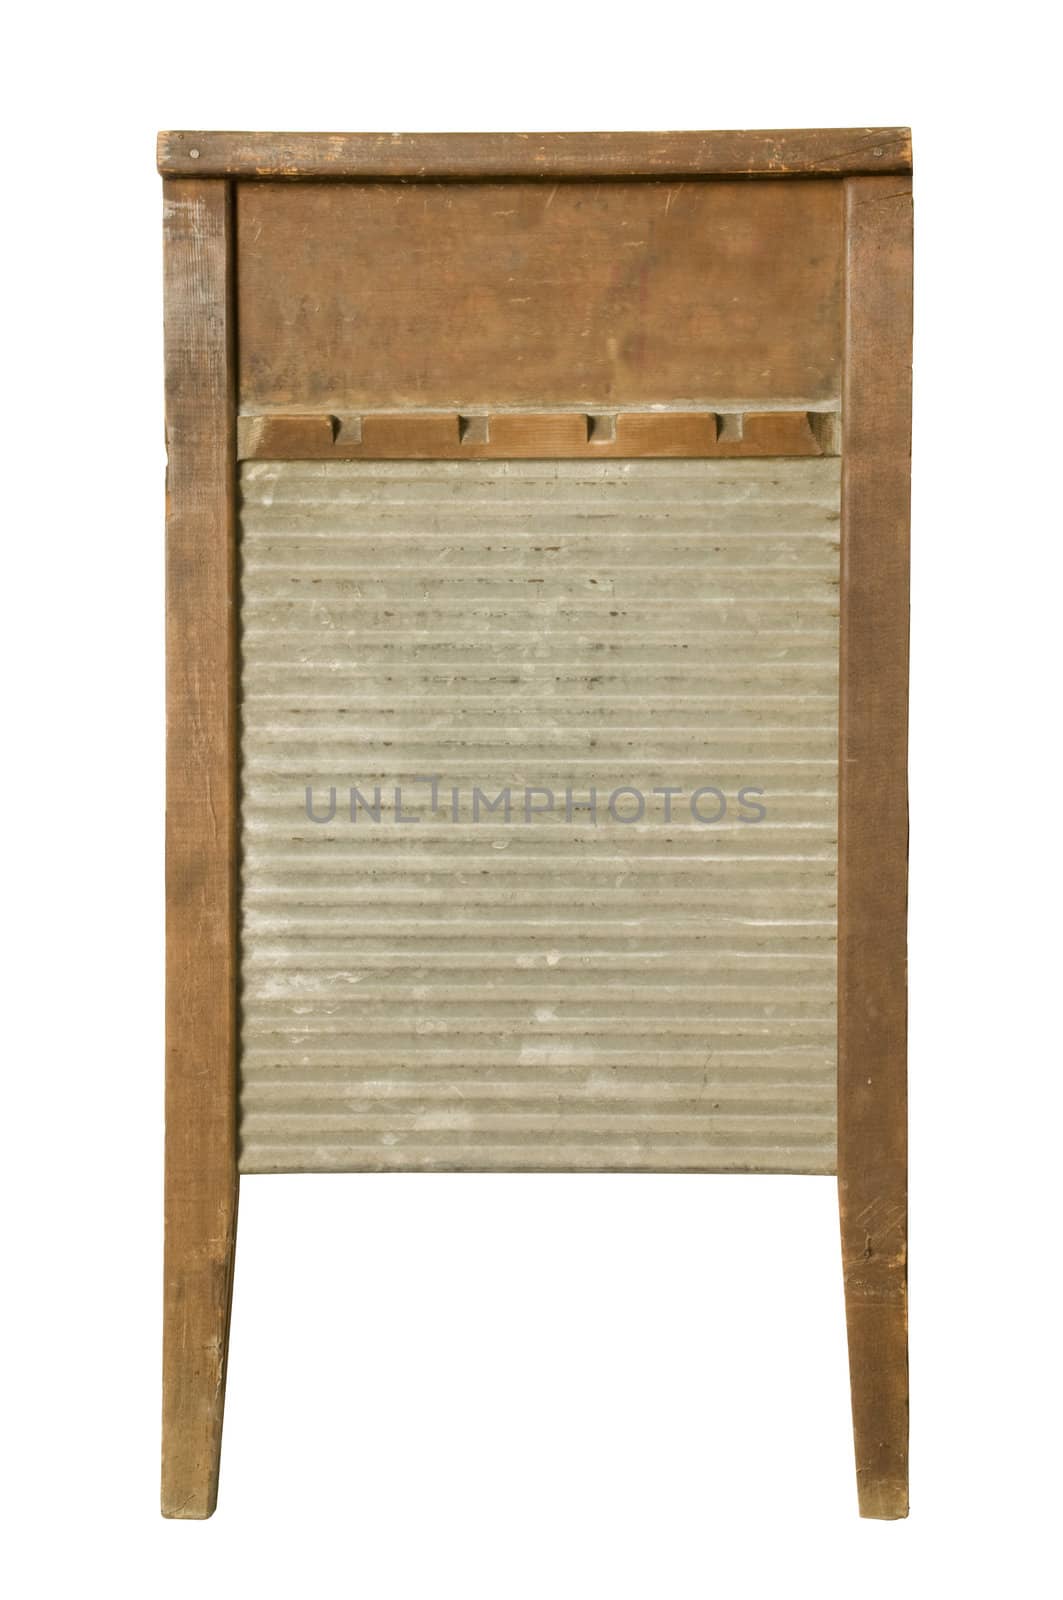 Antique Washboard by Balefire9